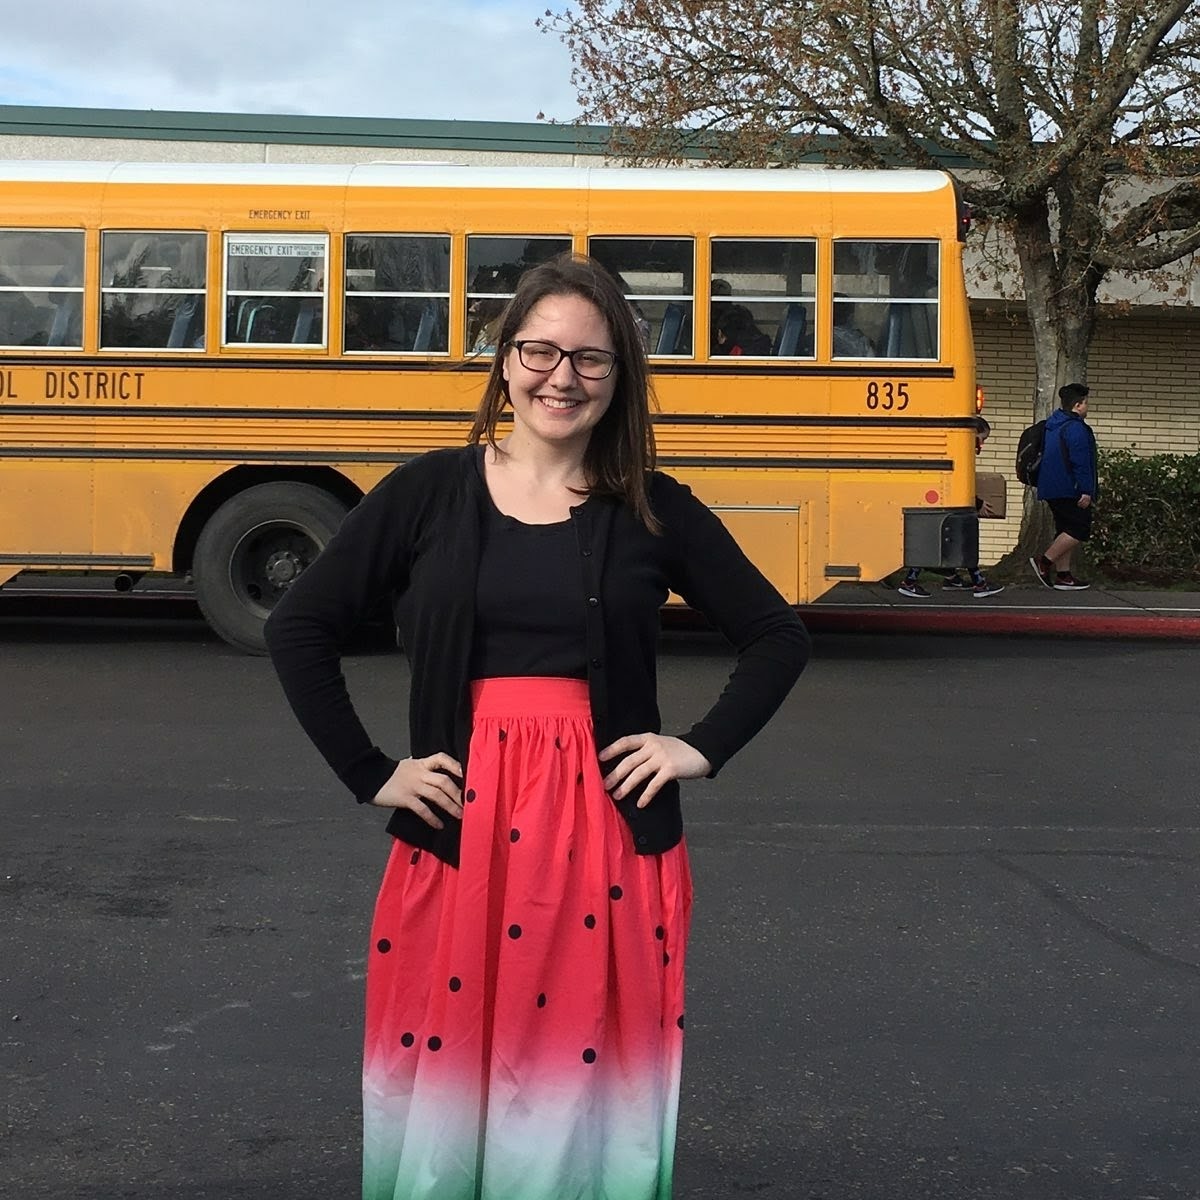 Cindy standing in front of a school bus. She has her hands on her hips and is smiling.